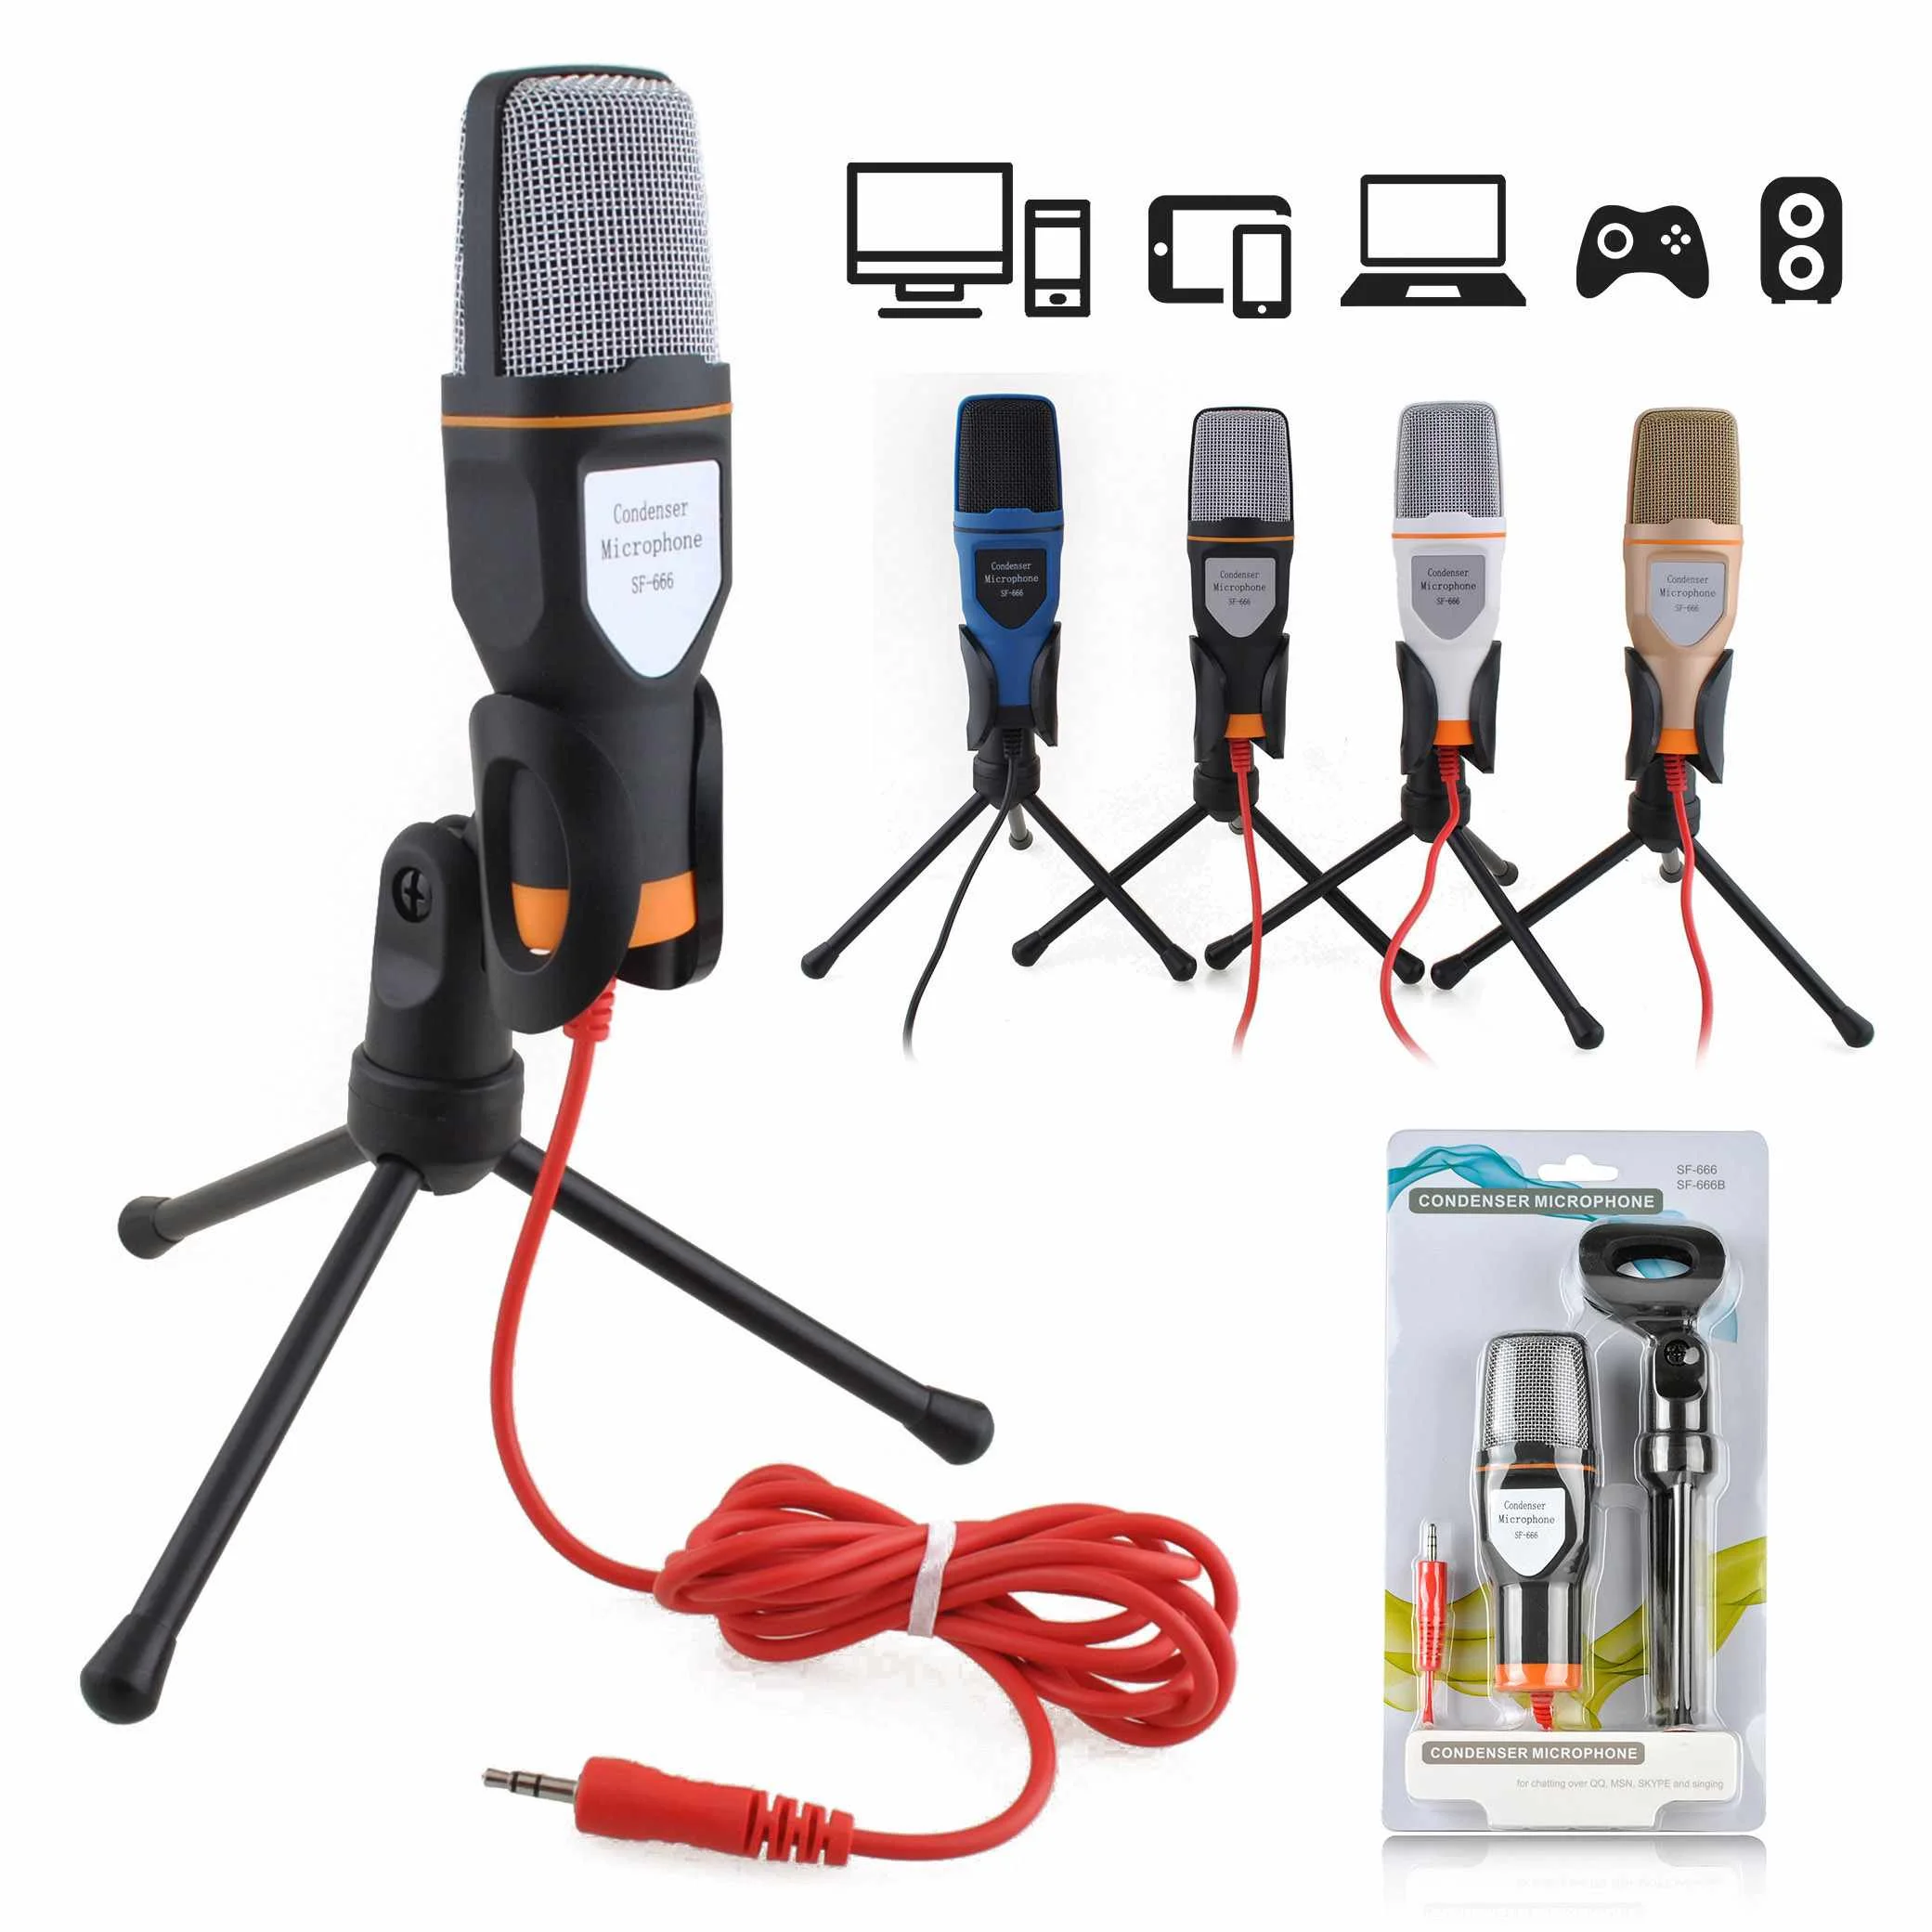 

SF-666 Condenser Microphone with Desktop tripod Stand for YouTube PC Computer Laptop Smartphone livestream Recording Chatting